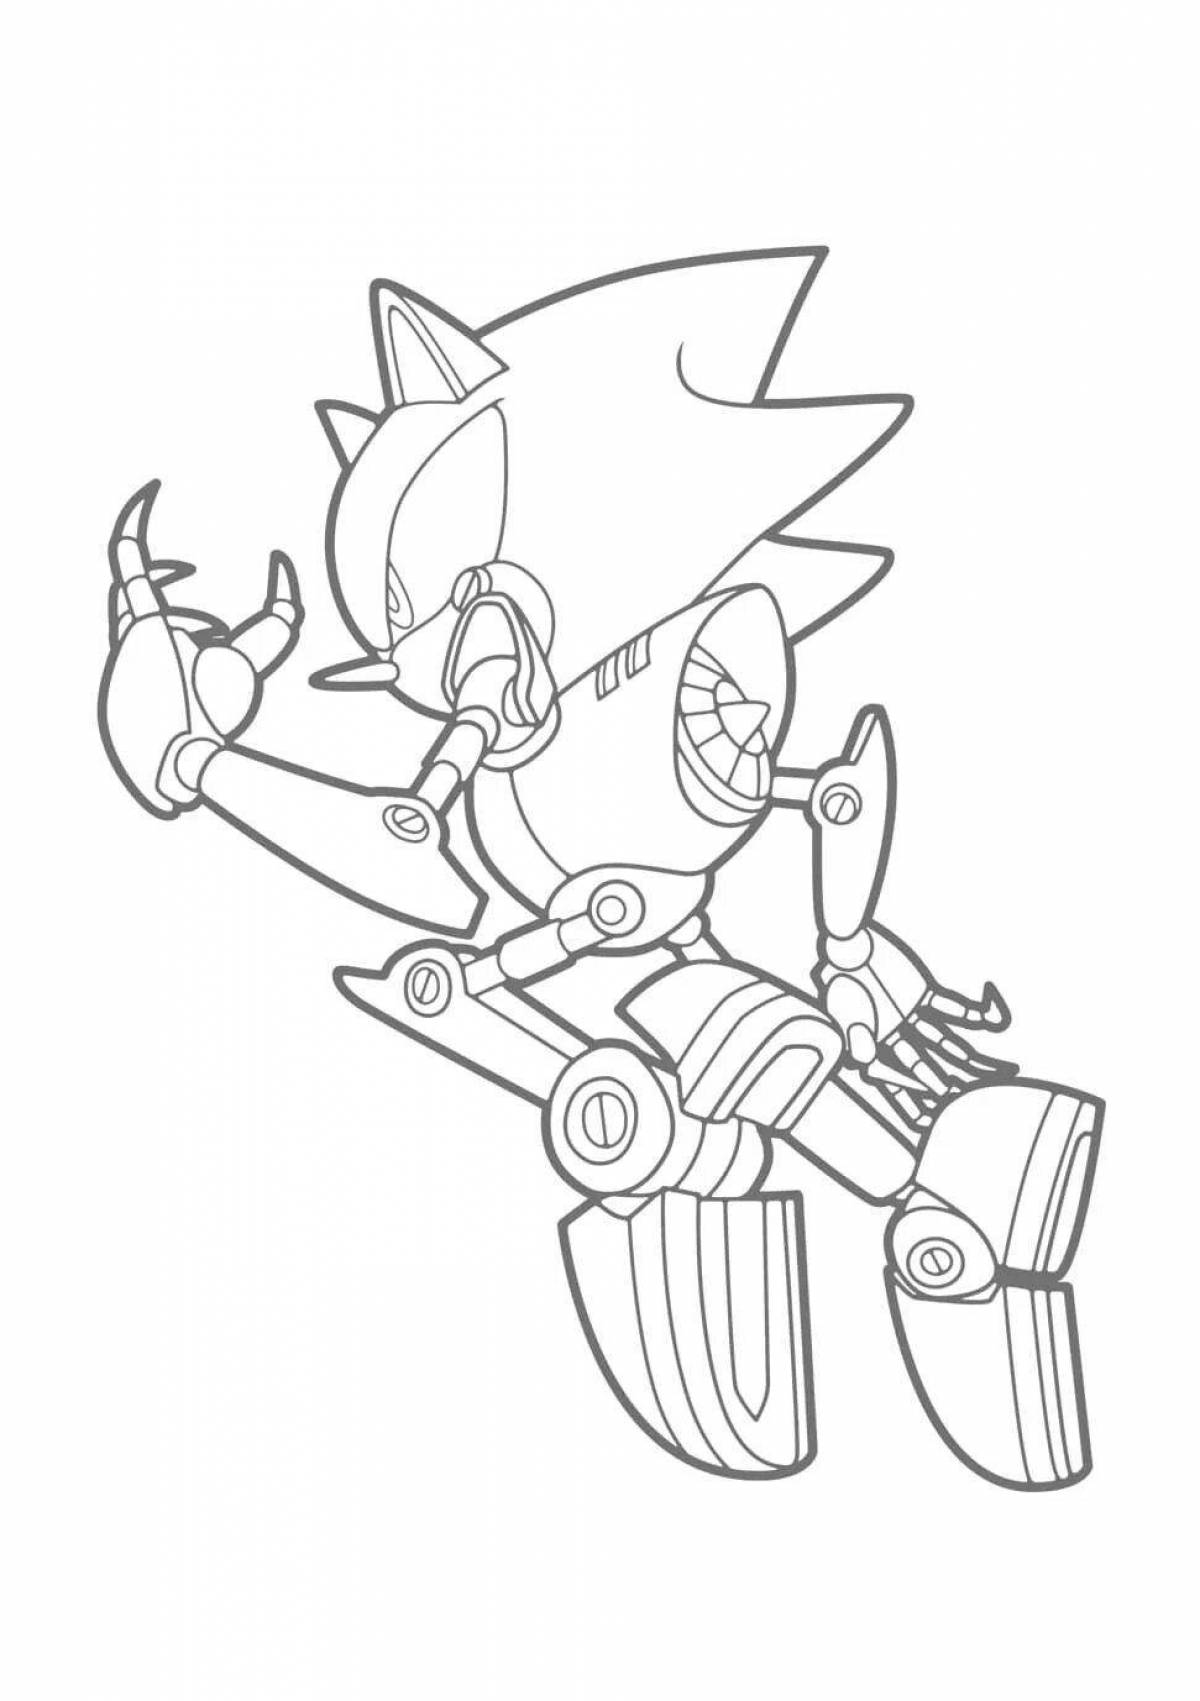 Coloring page of bold metallic shadow